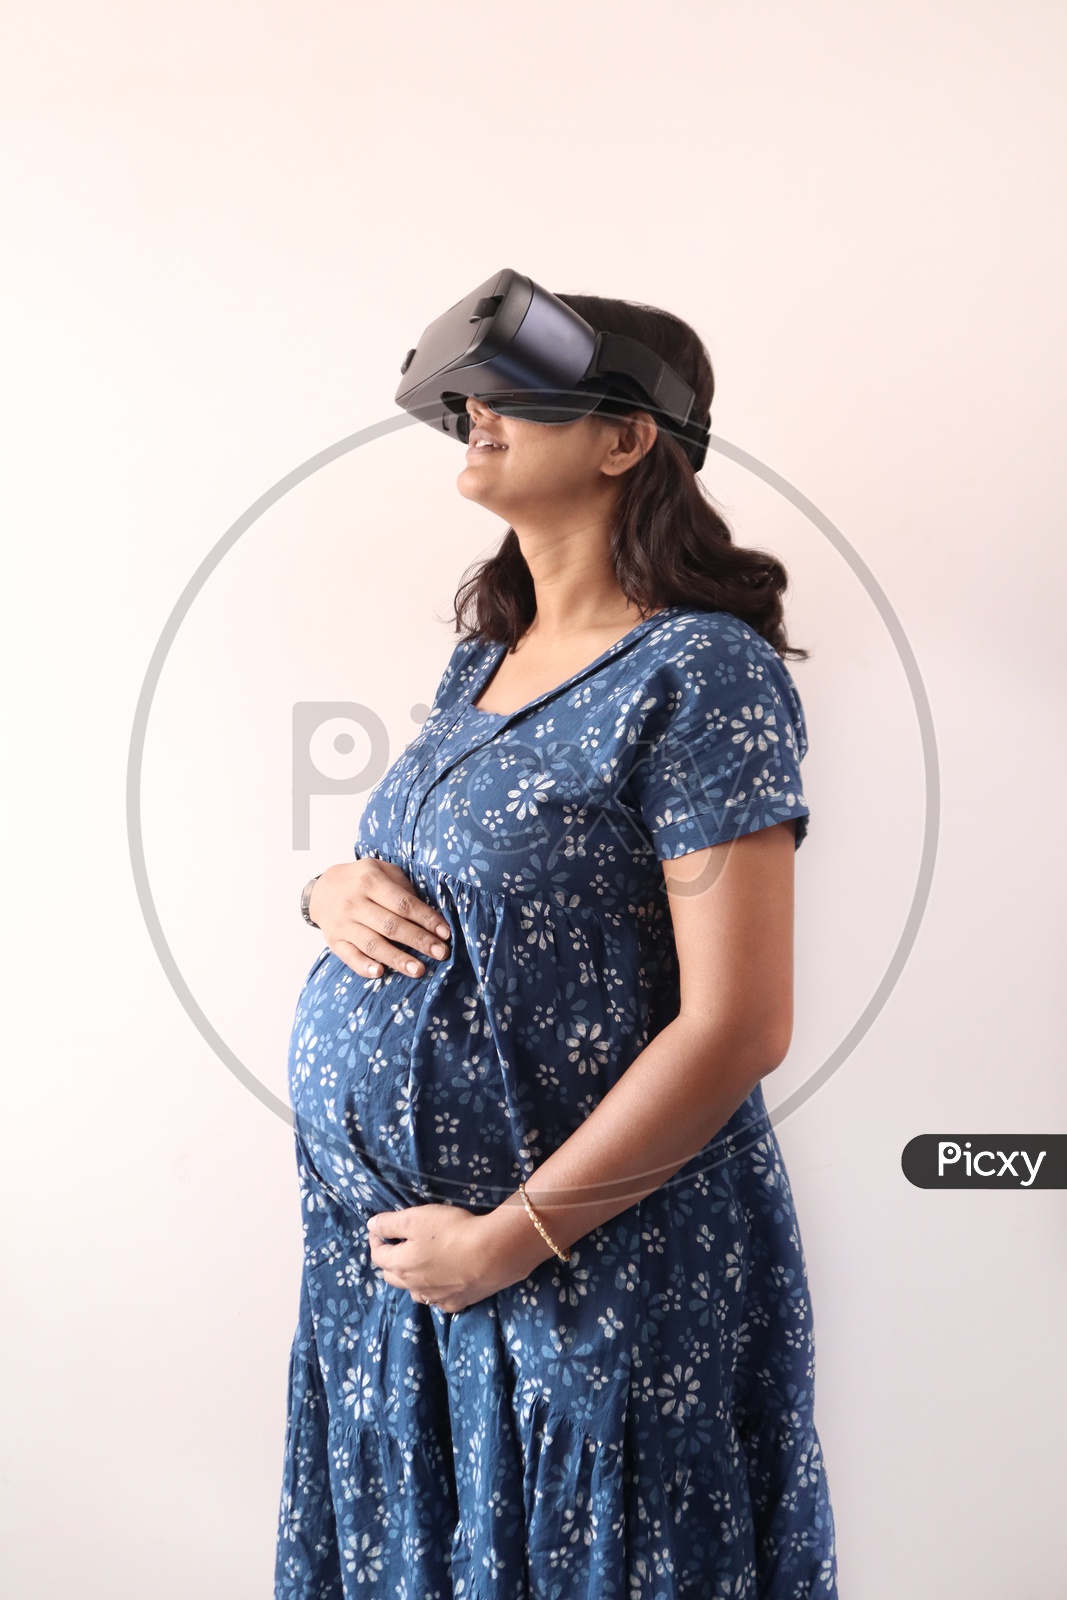 A Pregnant Woman With Hands On Belly And Virtual Reality Glass In Eye In Blue Dress.